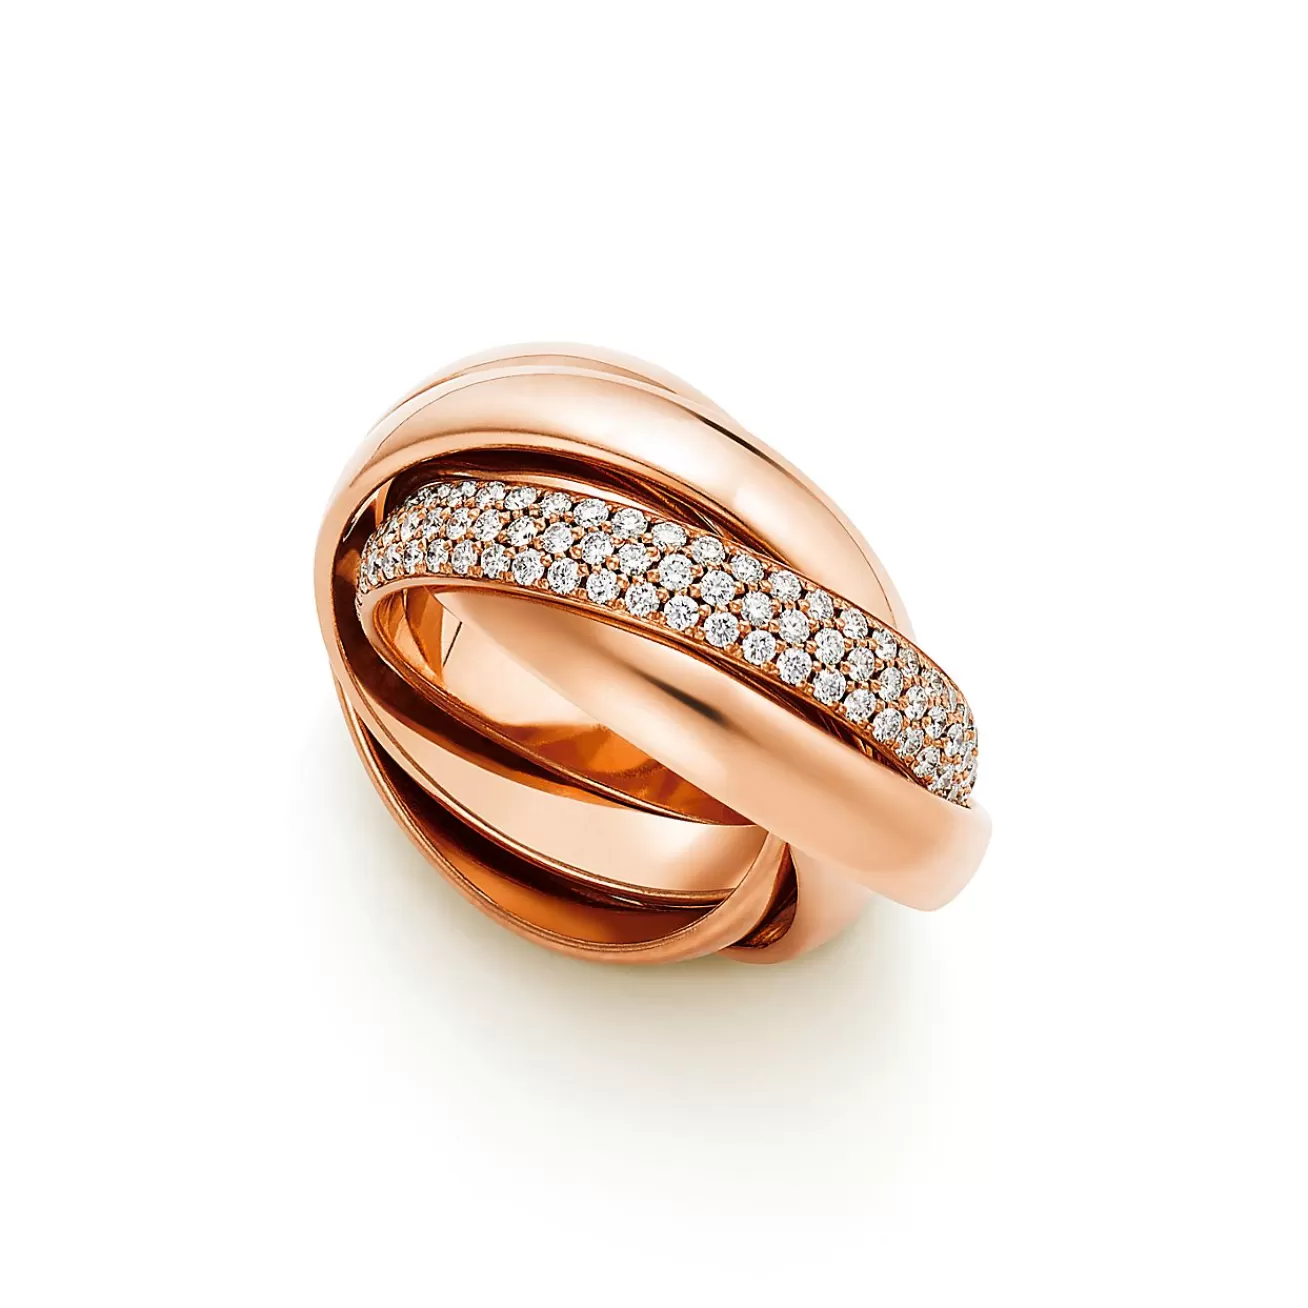 Tiffany & Co. Paloma's Melody five-band ring in 18k rose gold with diamonds. | ^ Rings | Rose Gold Jewelry